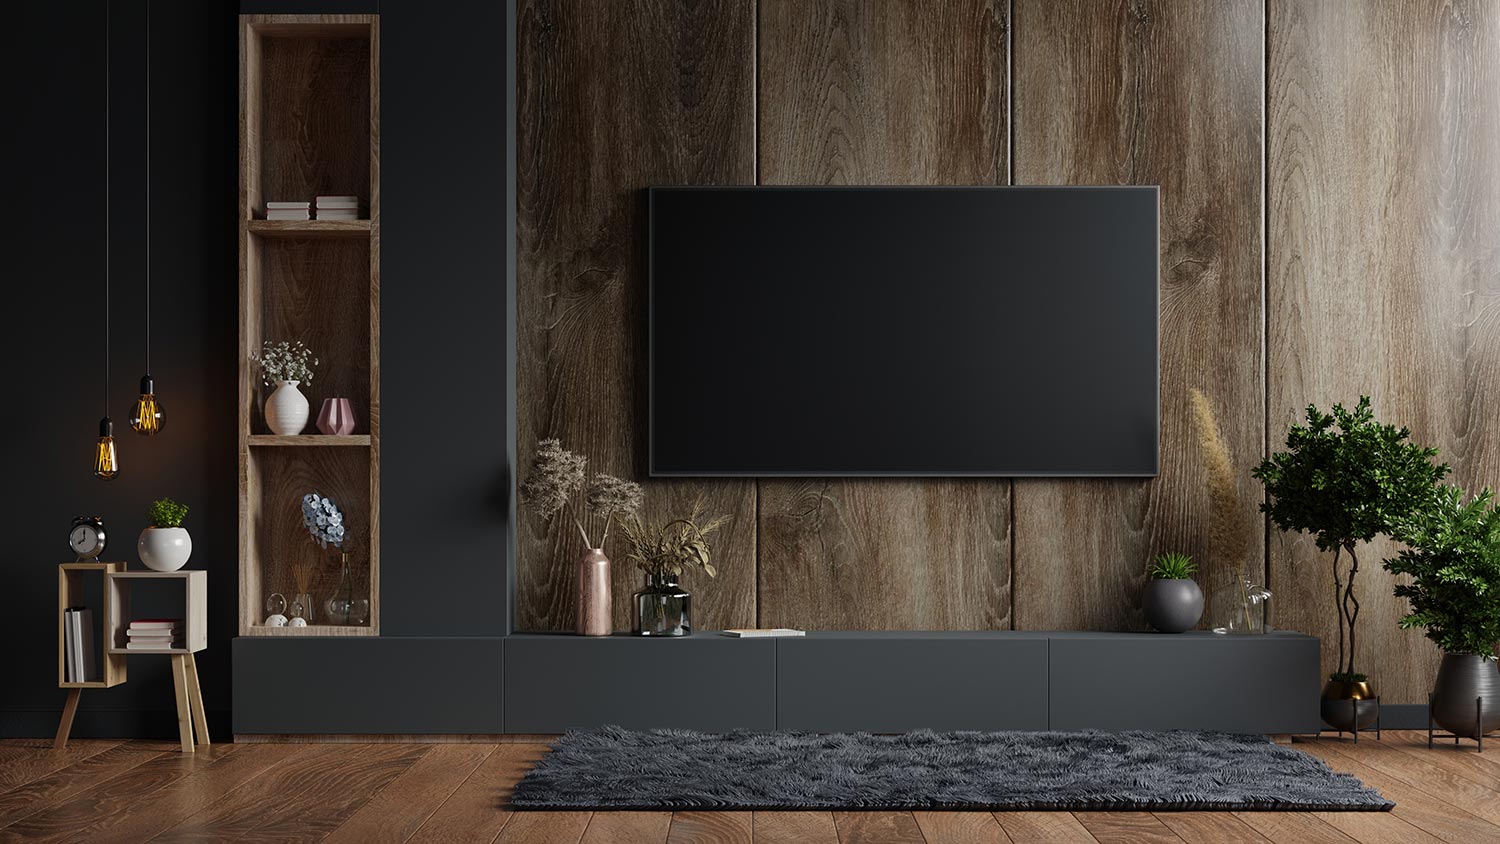 Mockup a TV wall mounted in a dark room with a dark wood wall